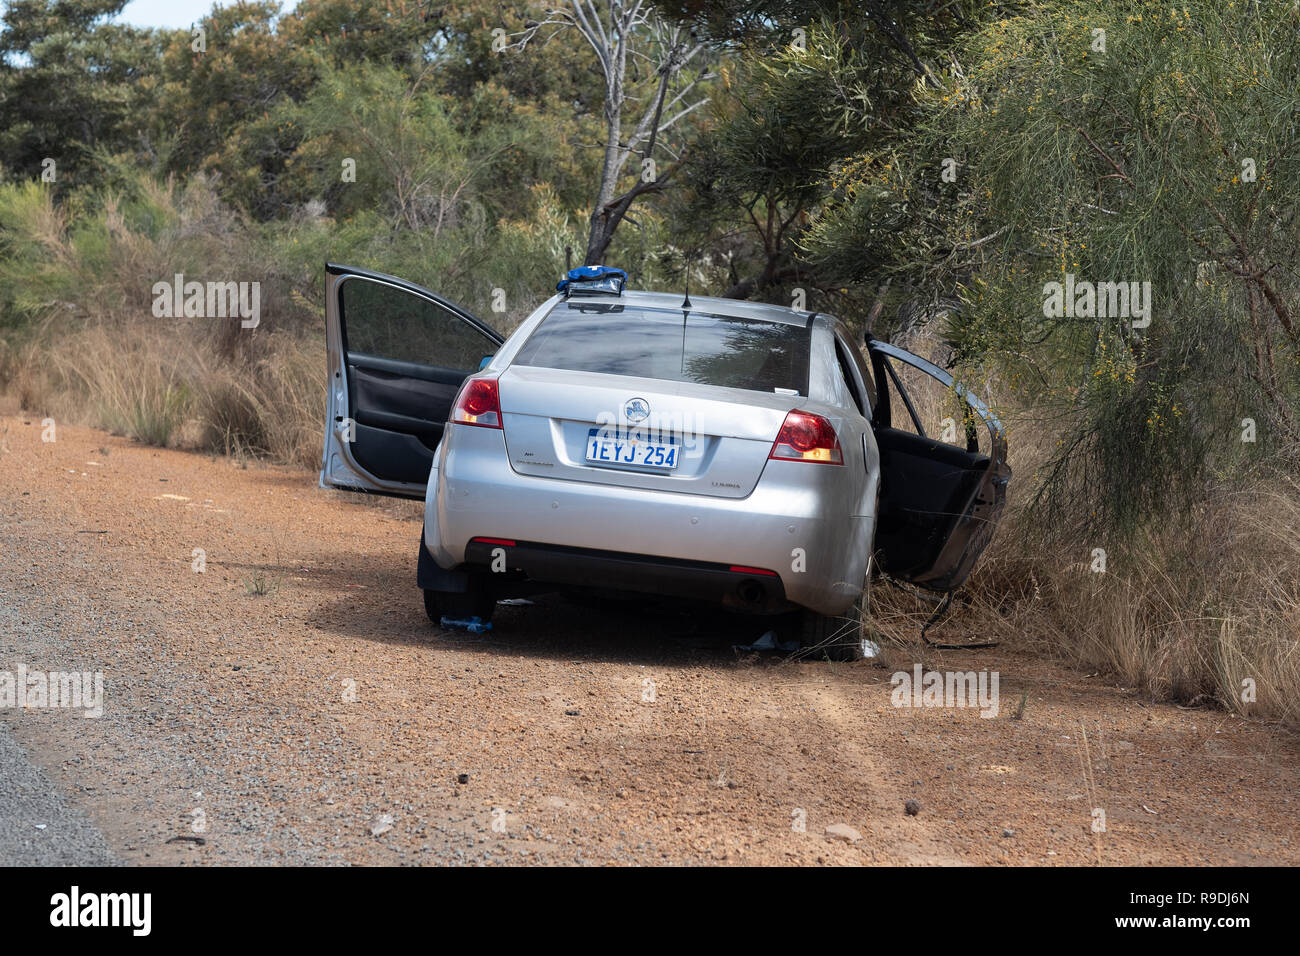 Cataby, Australia. 22nd December, 2018. A silver Commodore involved in a traffic accident sits in bushes after passengers have been conveyed to a nearby ambulance. Credit: Joshua Lawrie/Alamy Live News Stock Photo